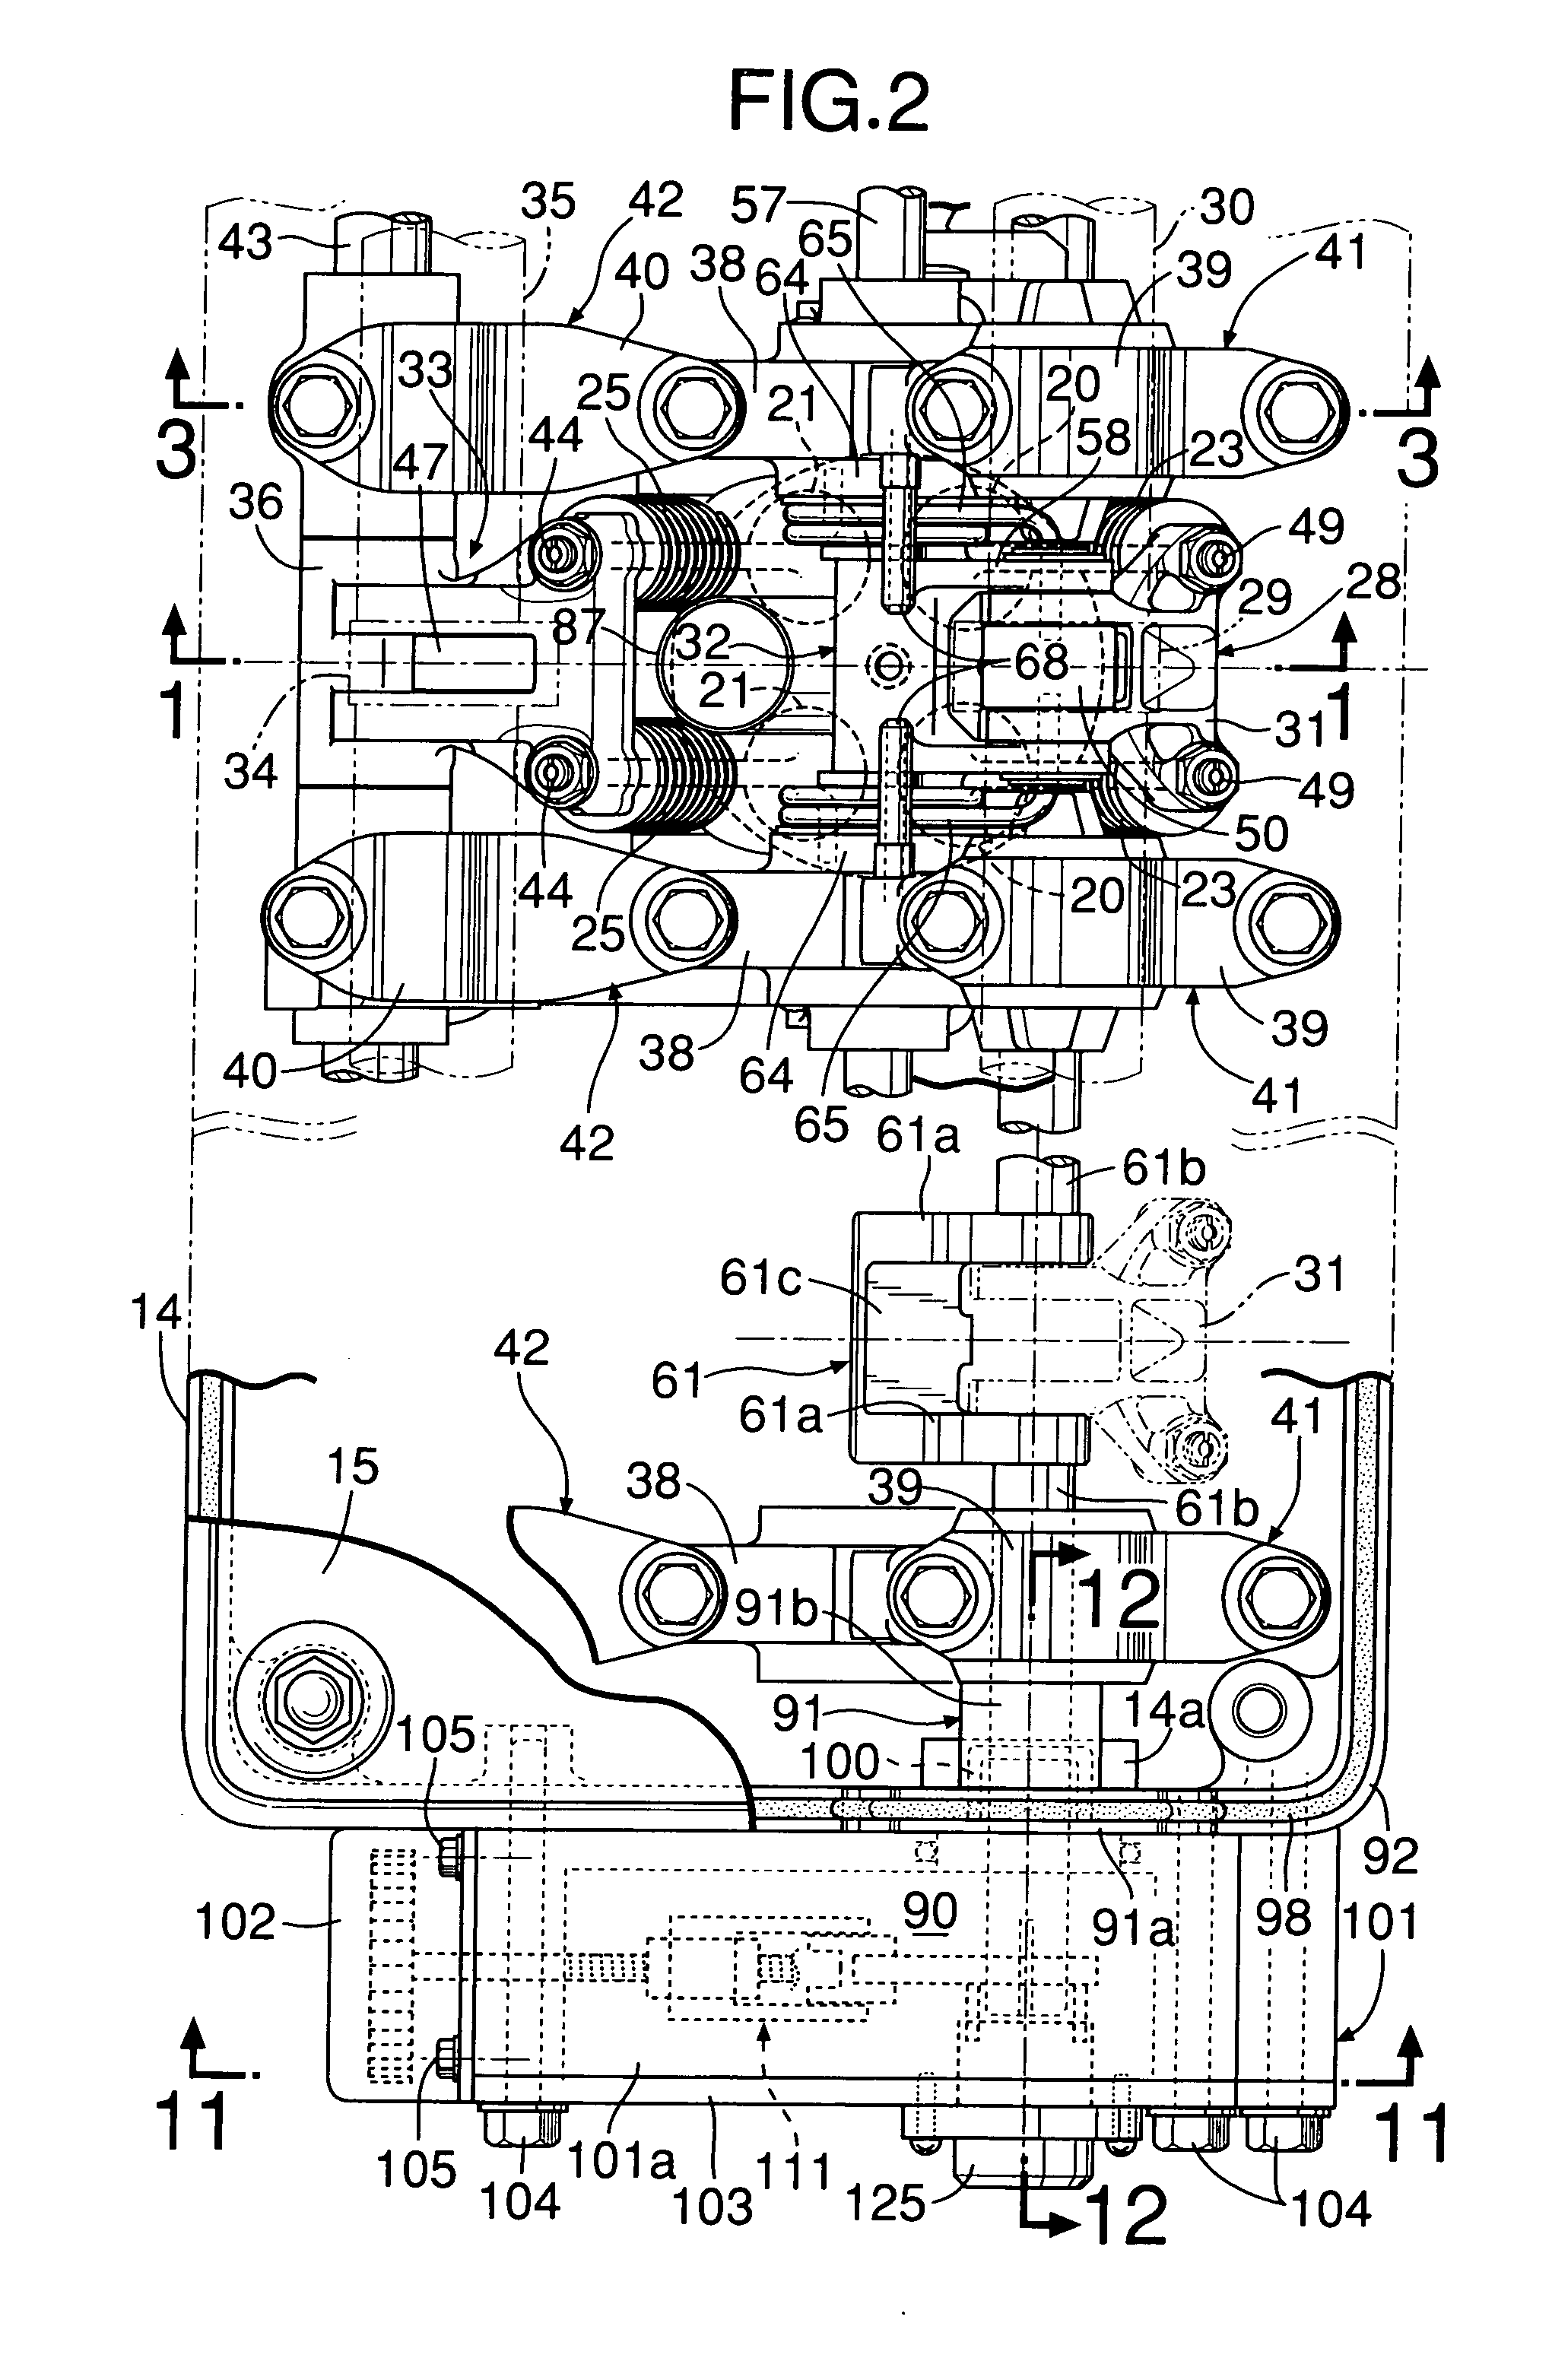 Drive of variable valve lift mechanism